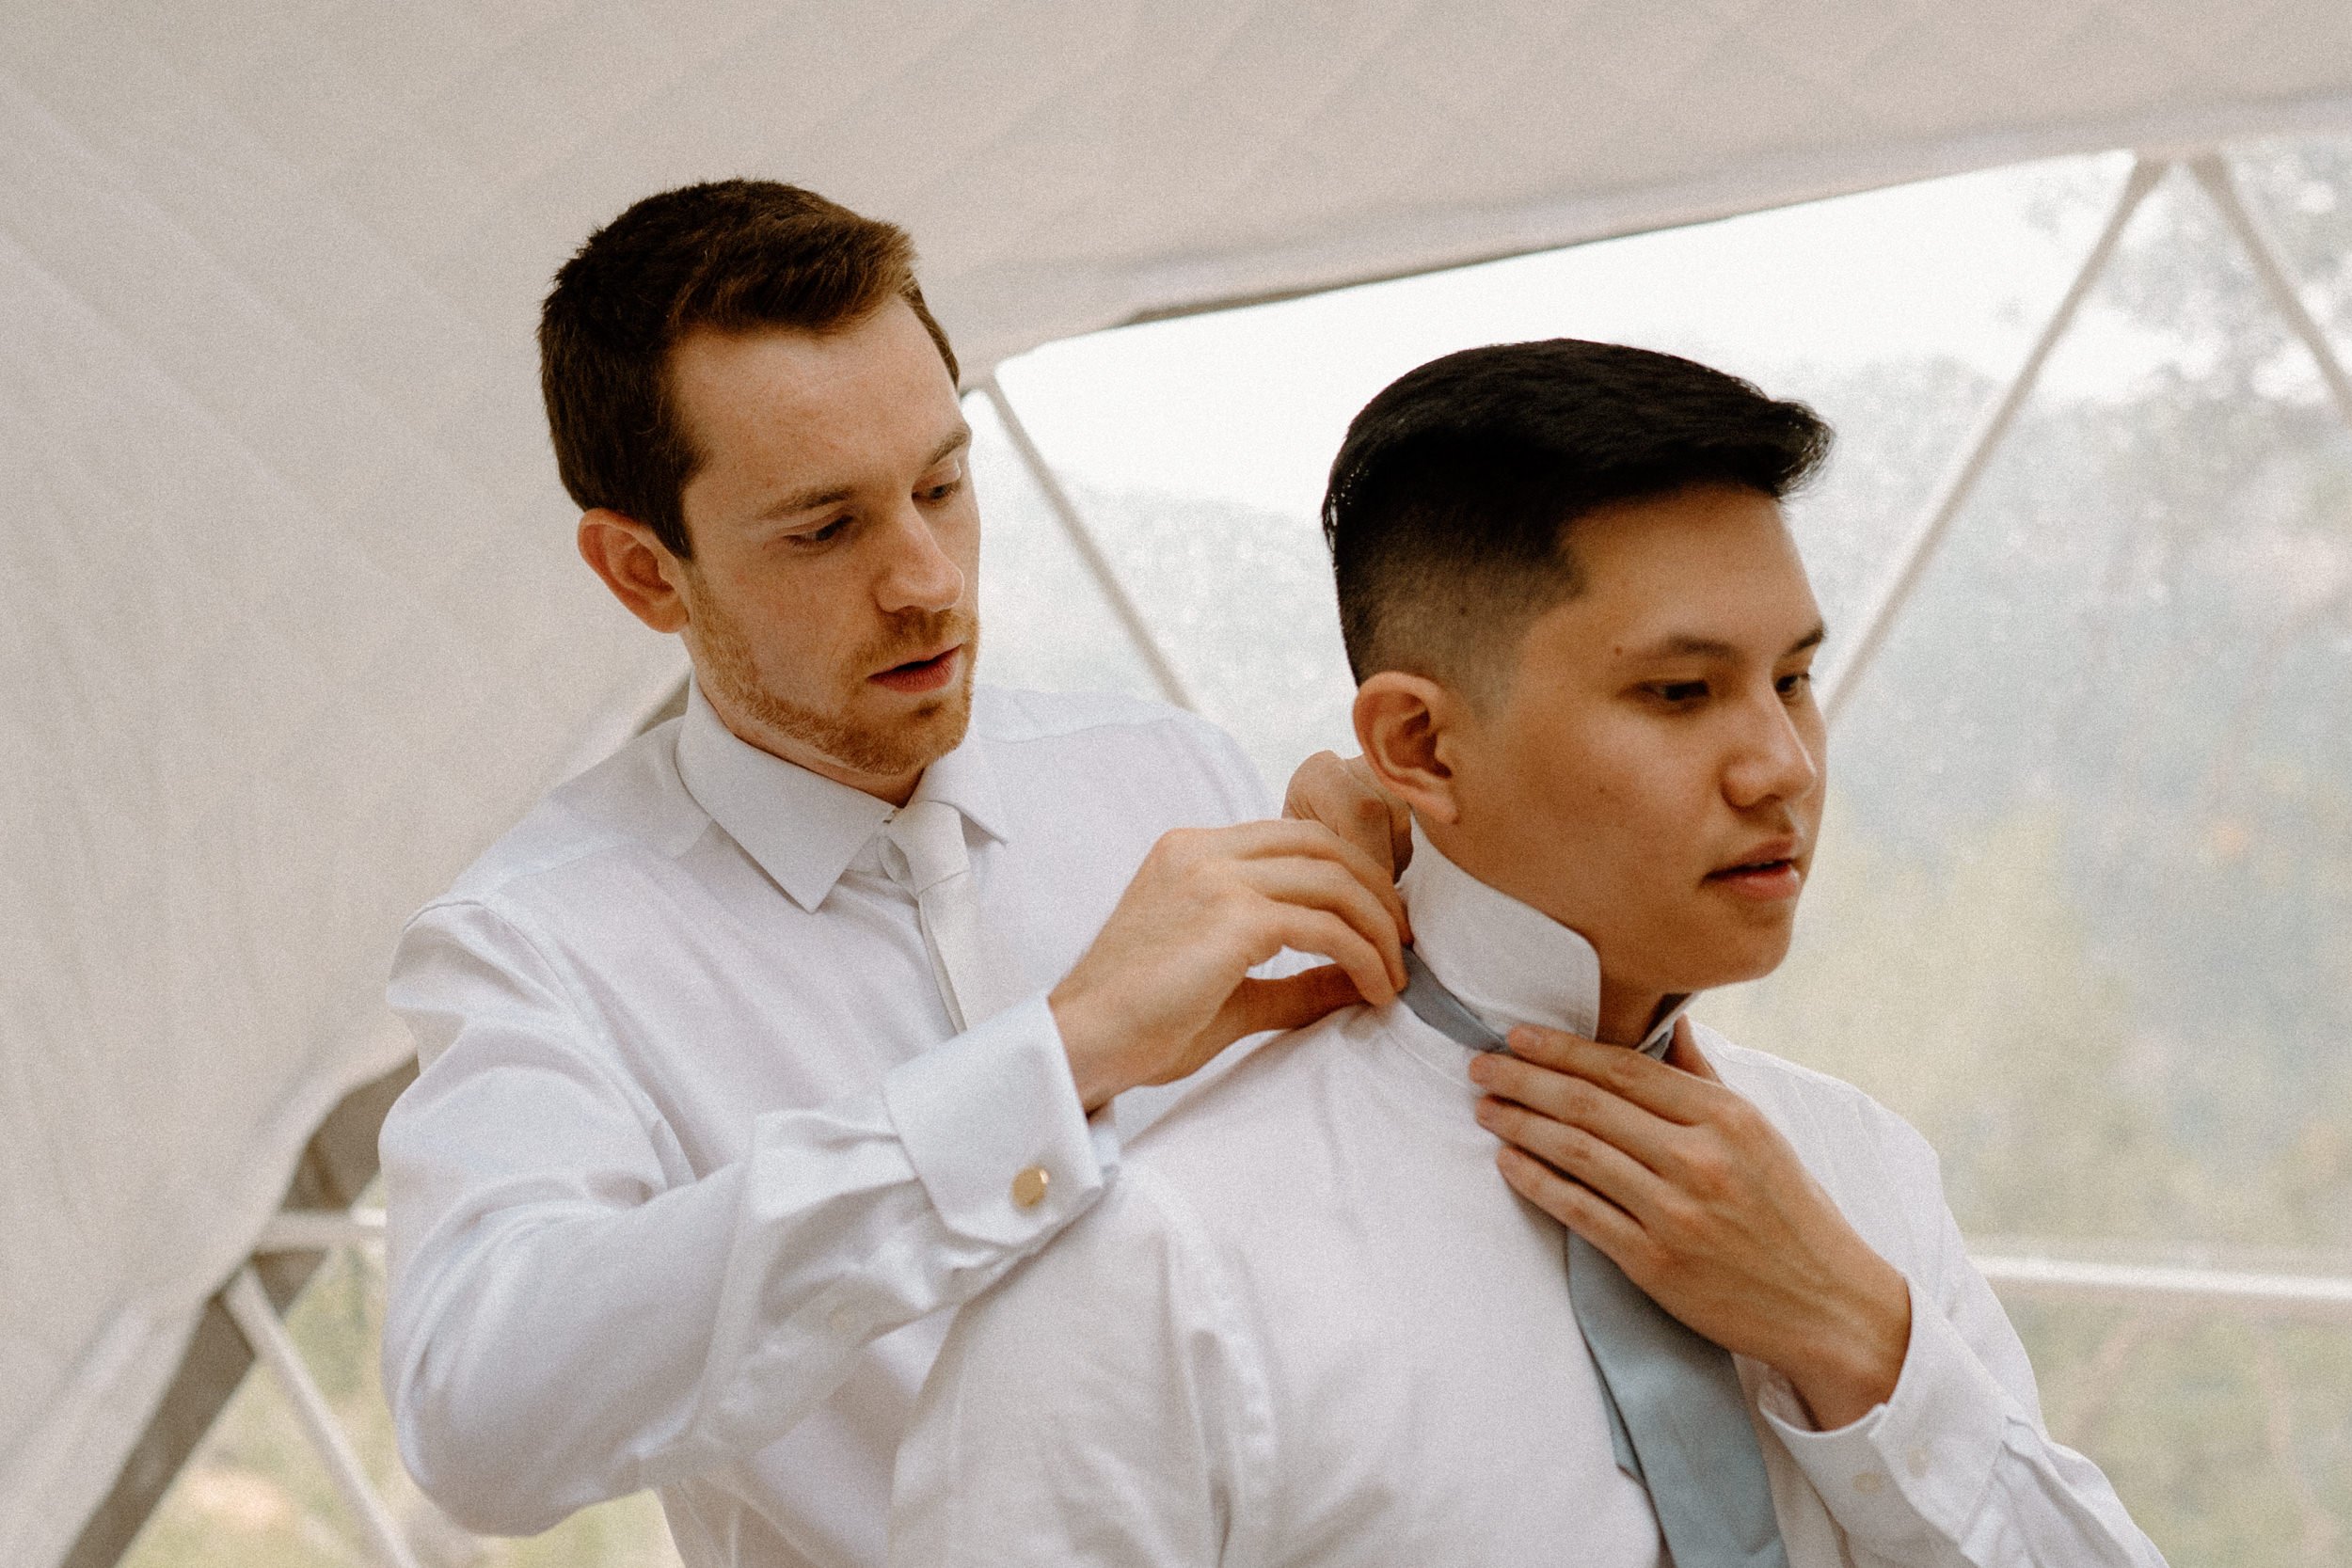 The groom helps a groomsman with his tie